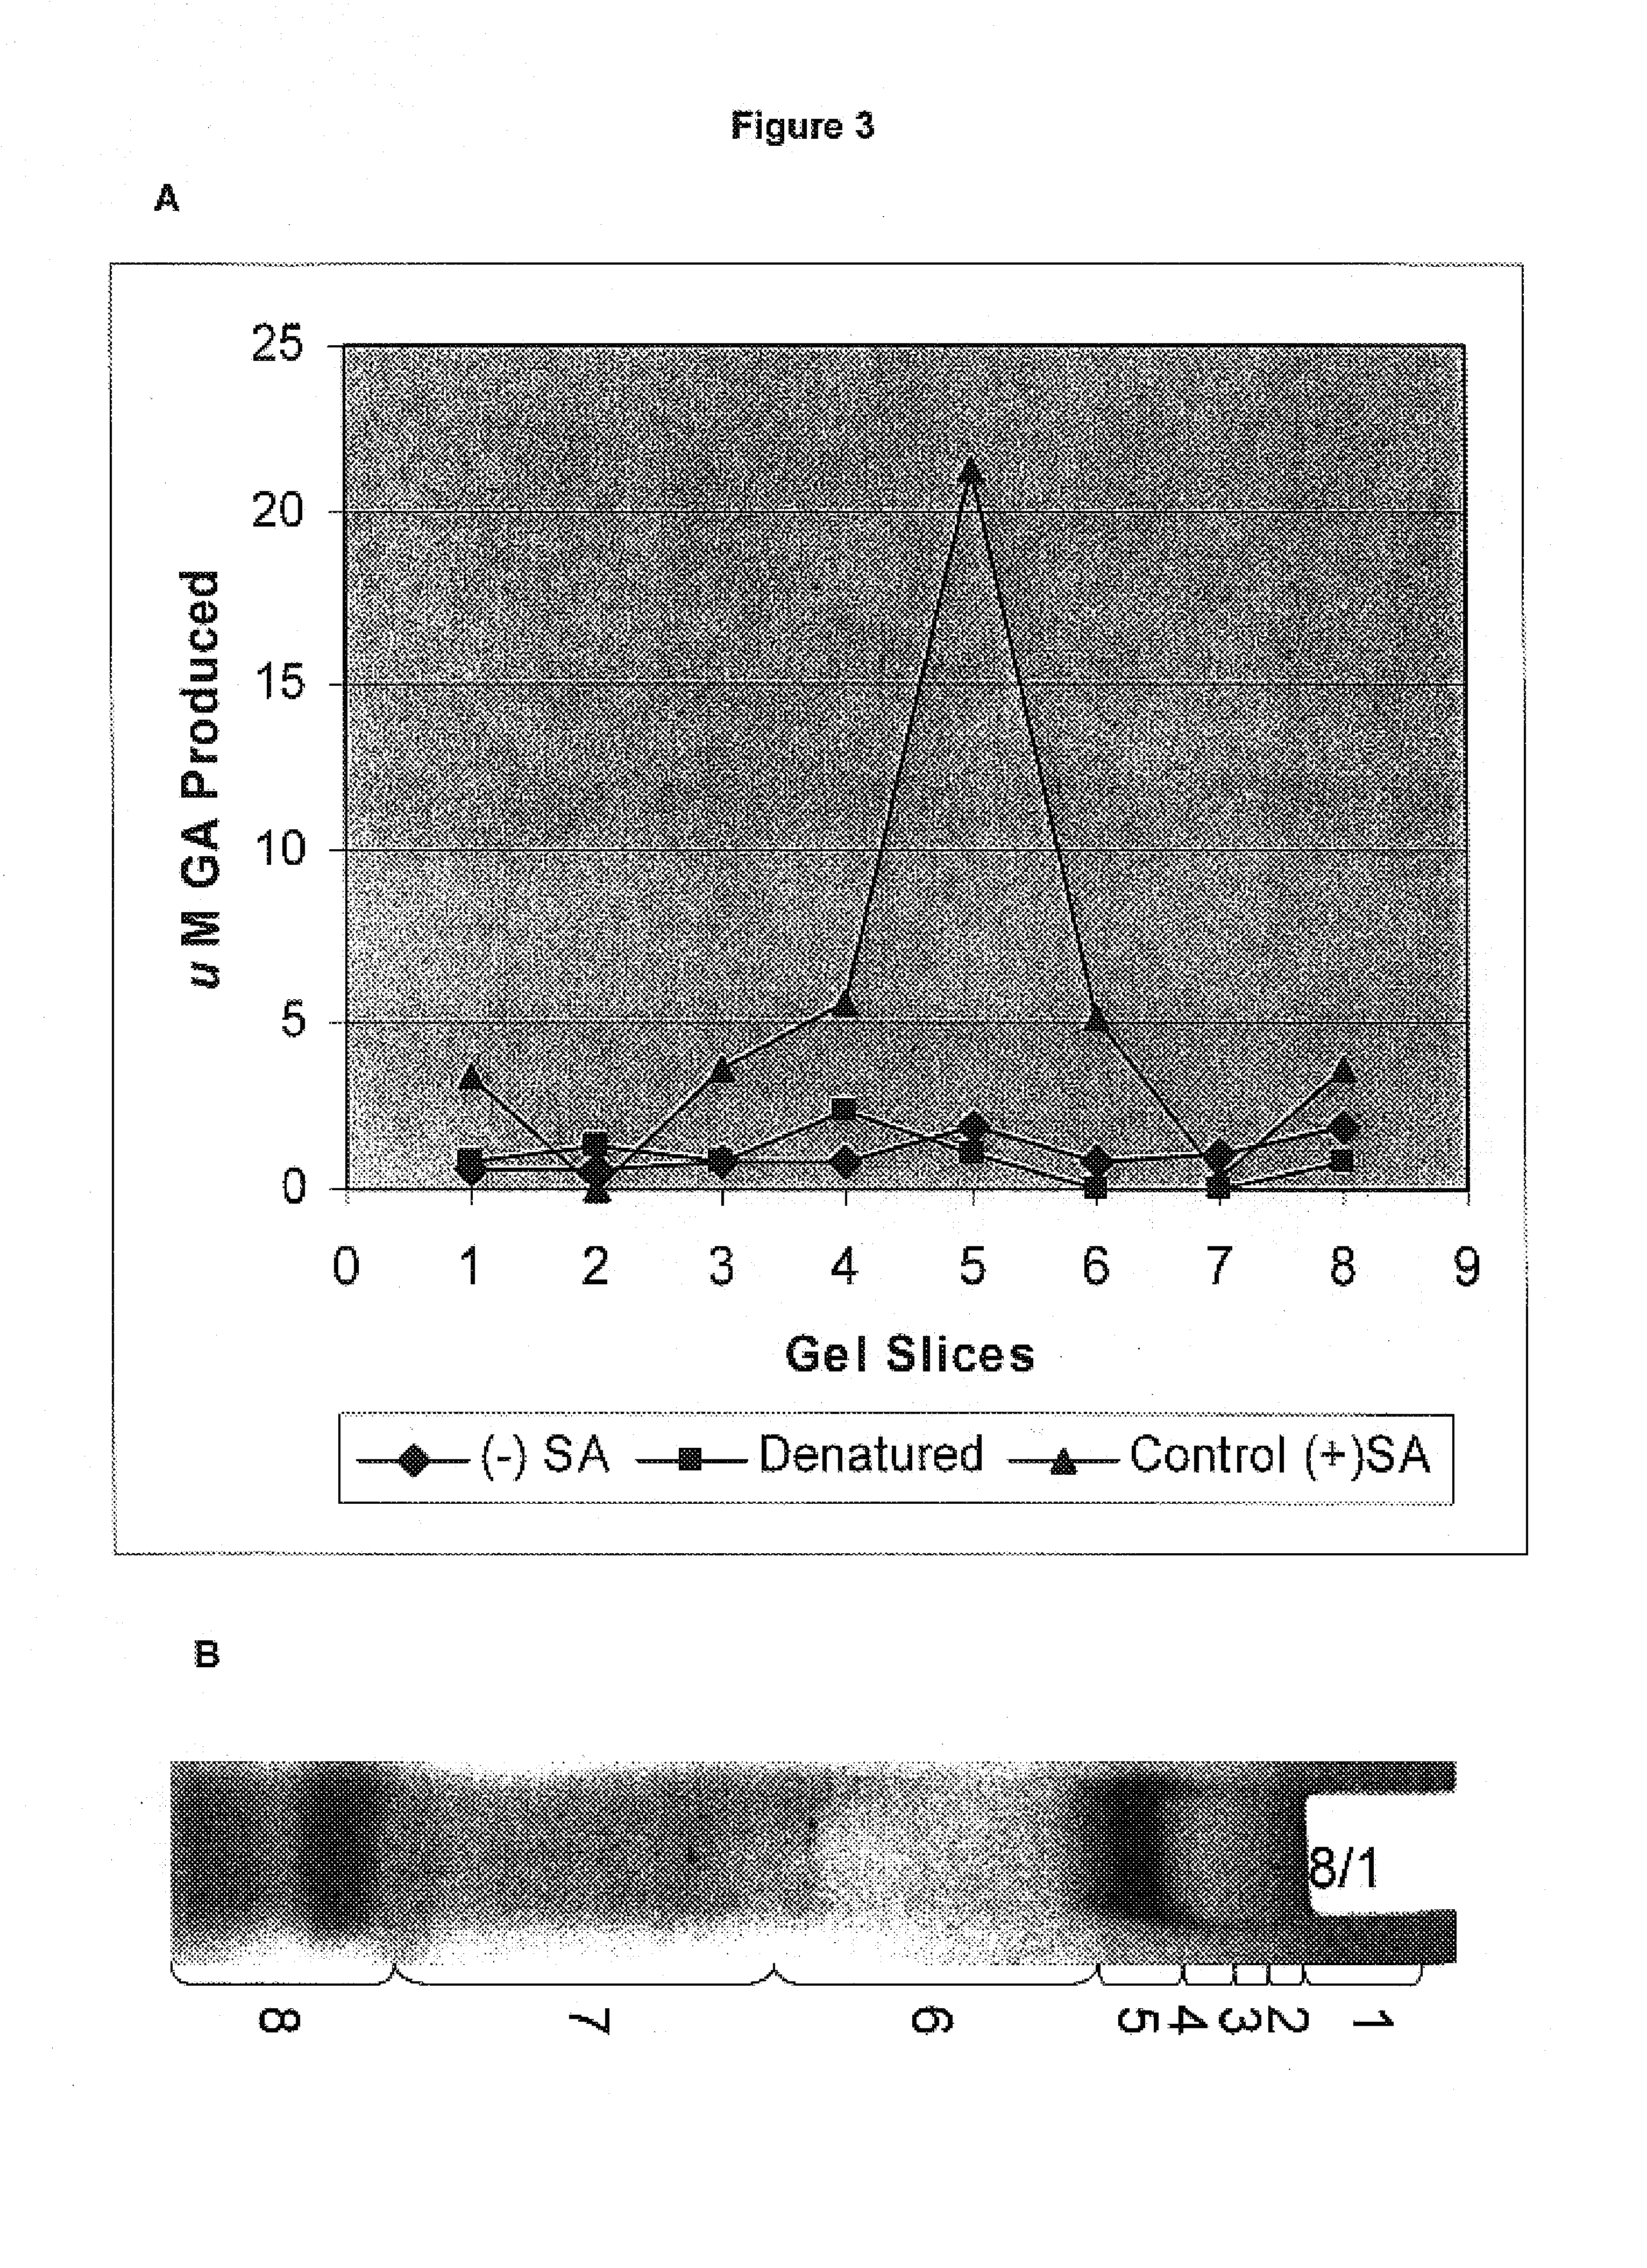 Plants with elevated levels of gallic acid/polyphenol oxidase and methods of generating such plants